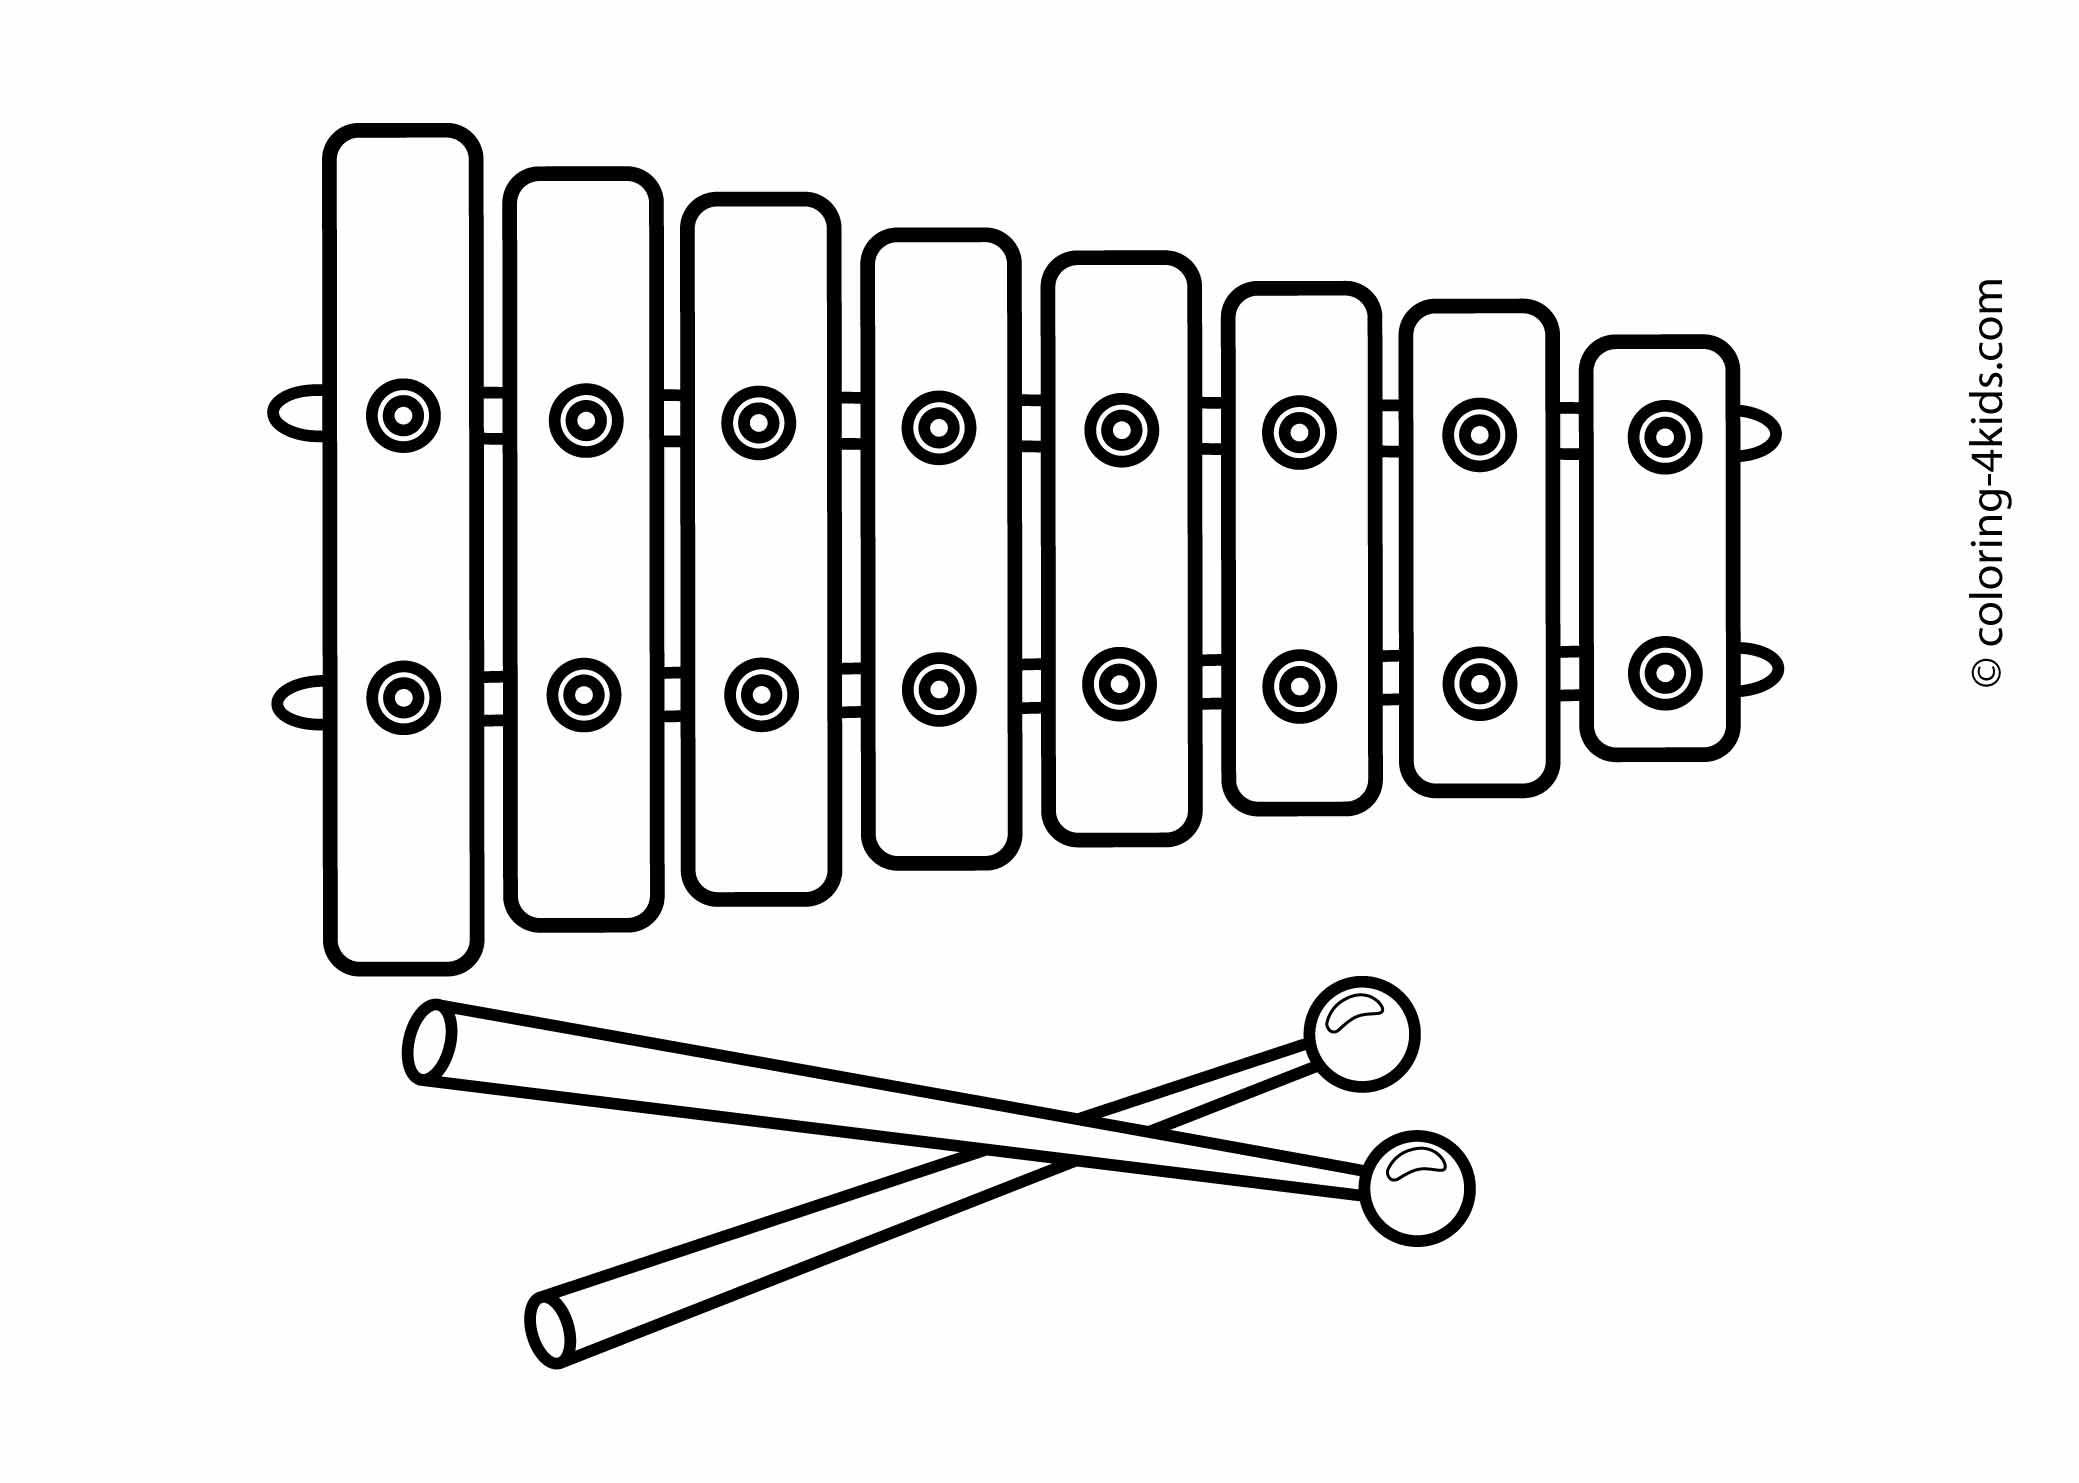 Instrument Coloring Pages For Kids
 Xylophone musical instruments coloring pages for kids